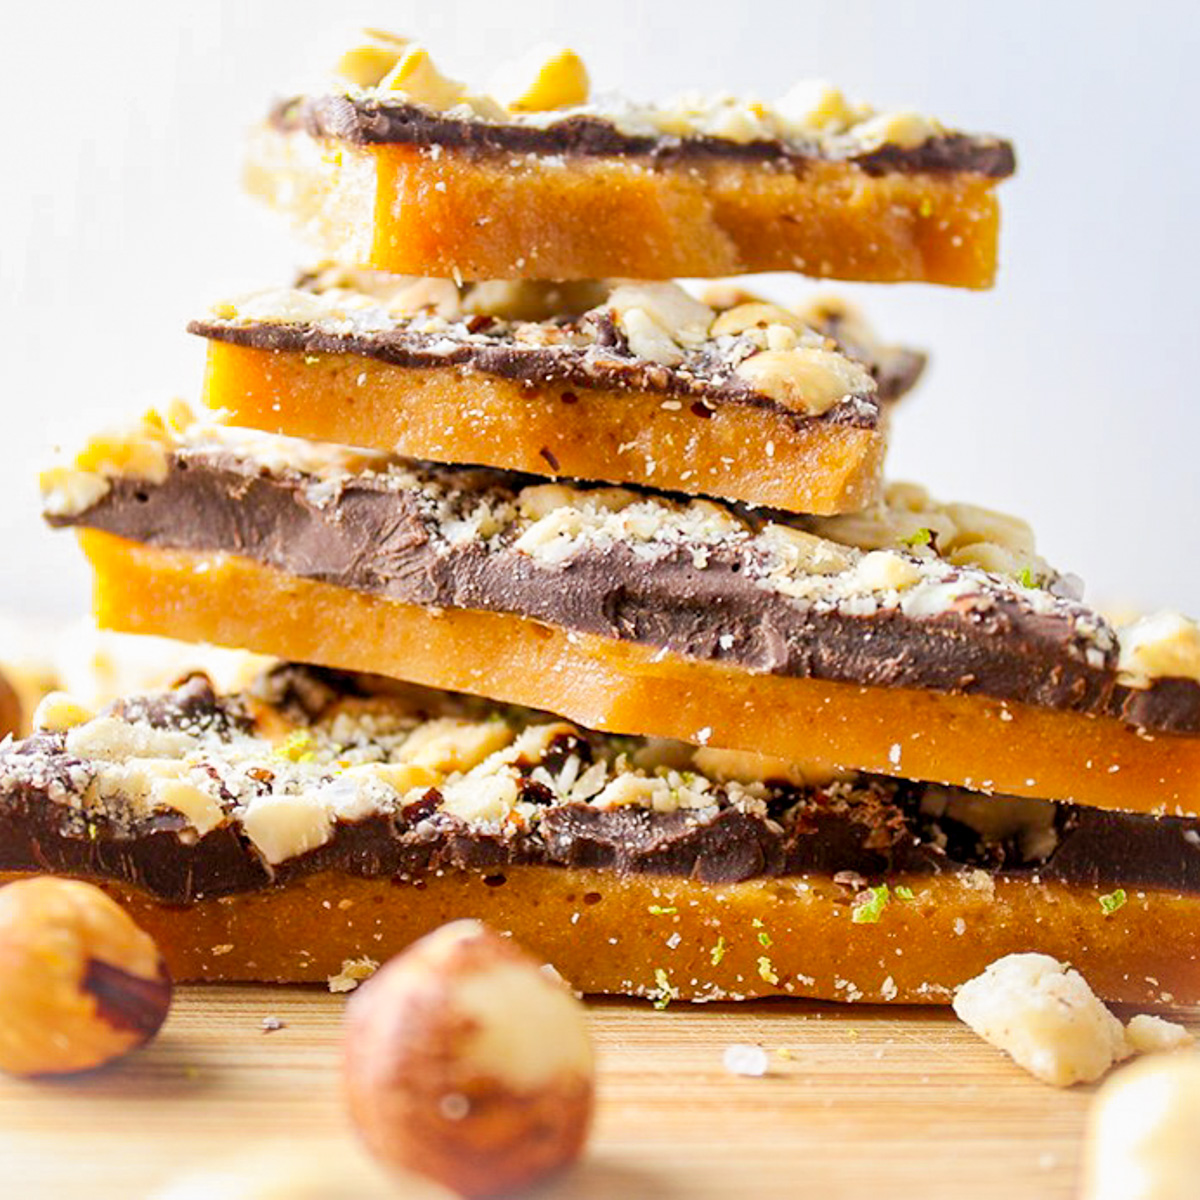 Chocolate toffee stacked on board with hazelnuts f